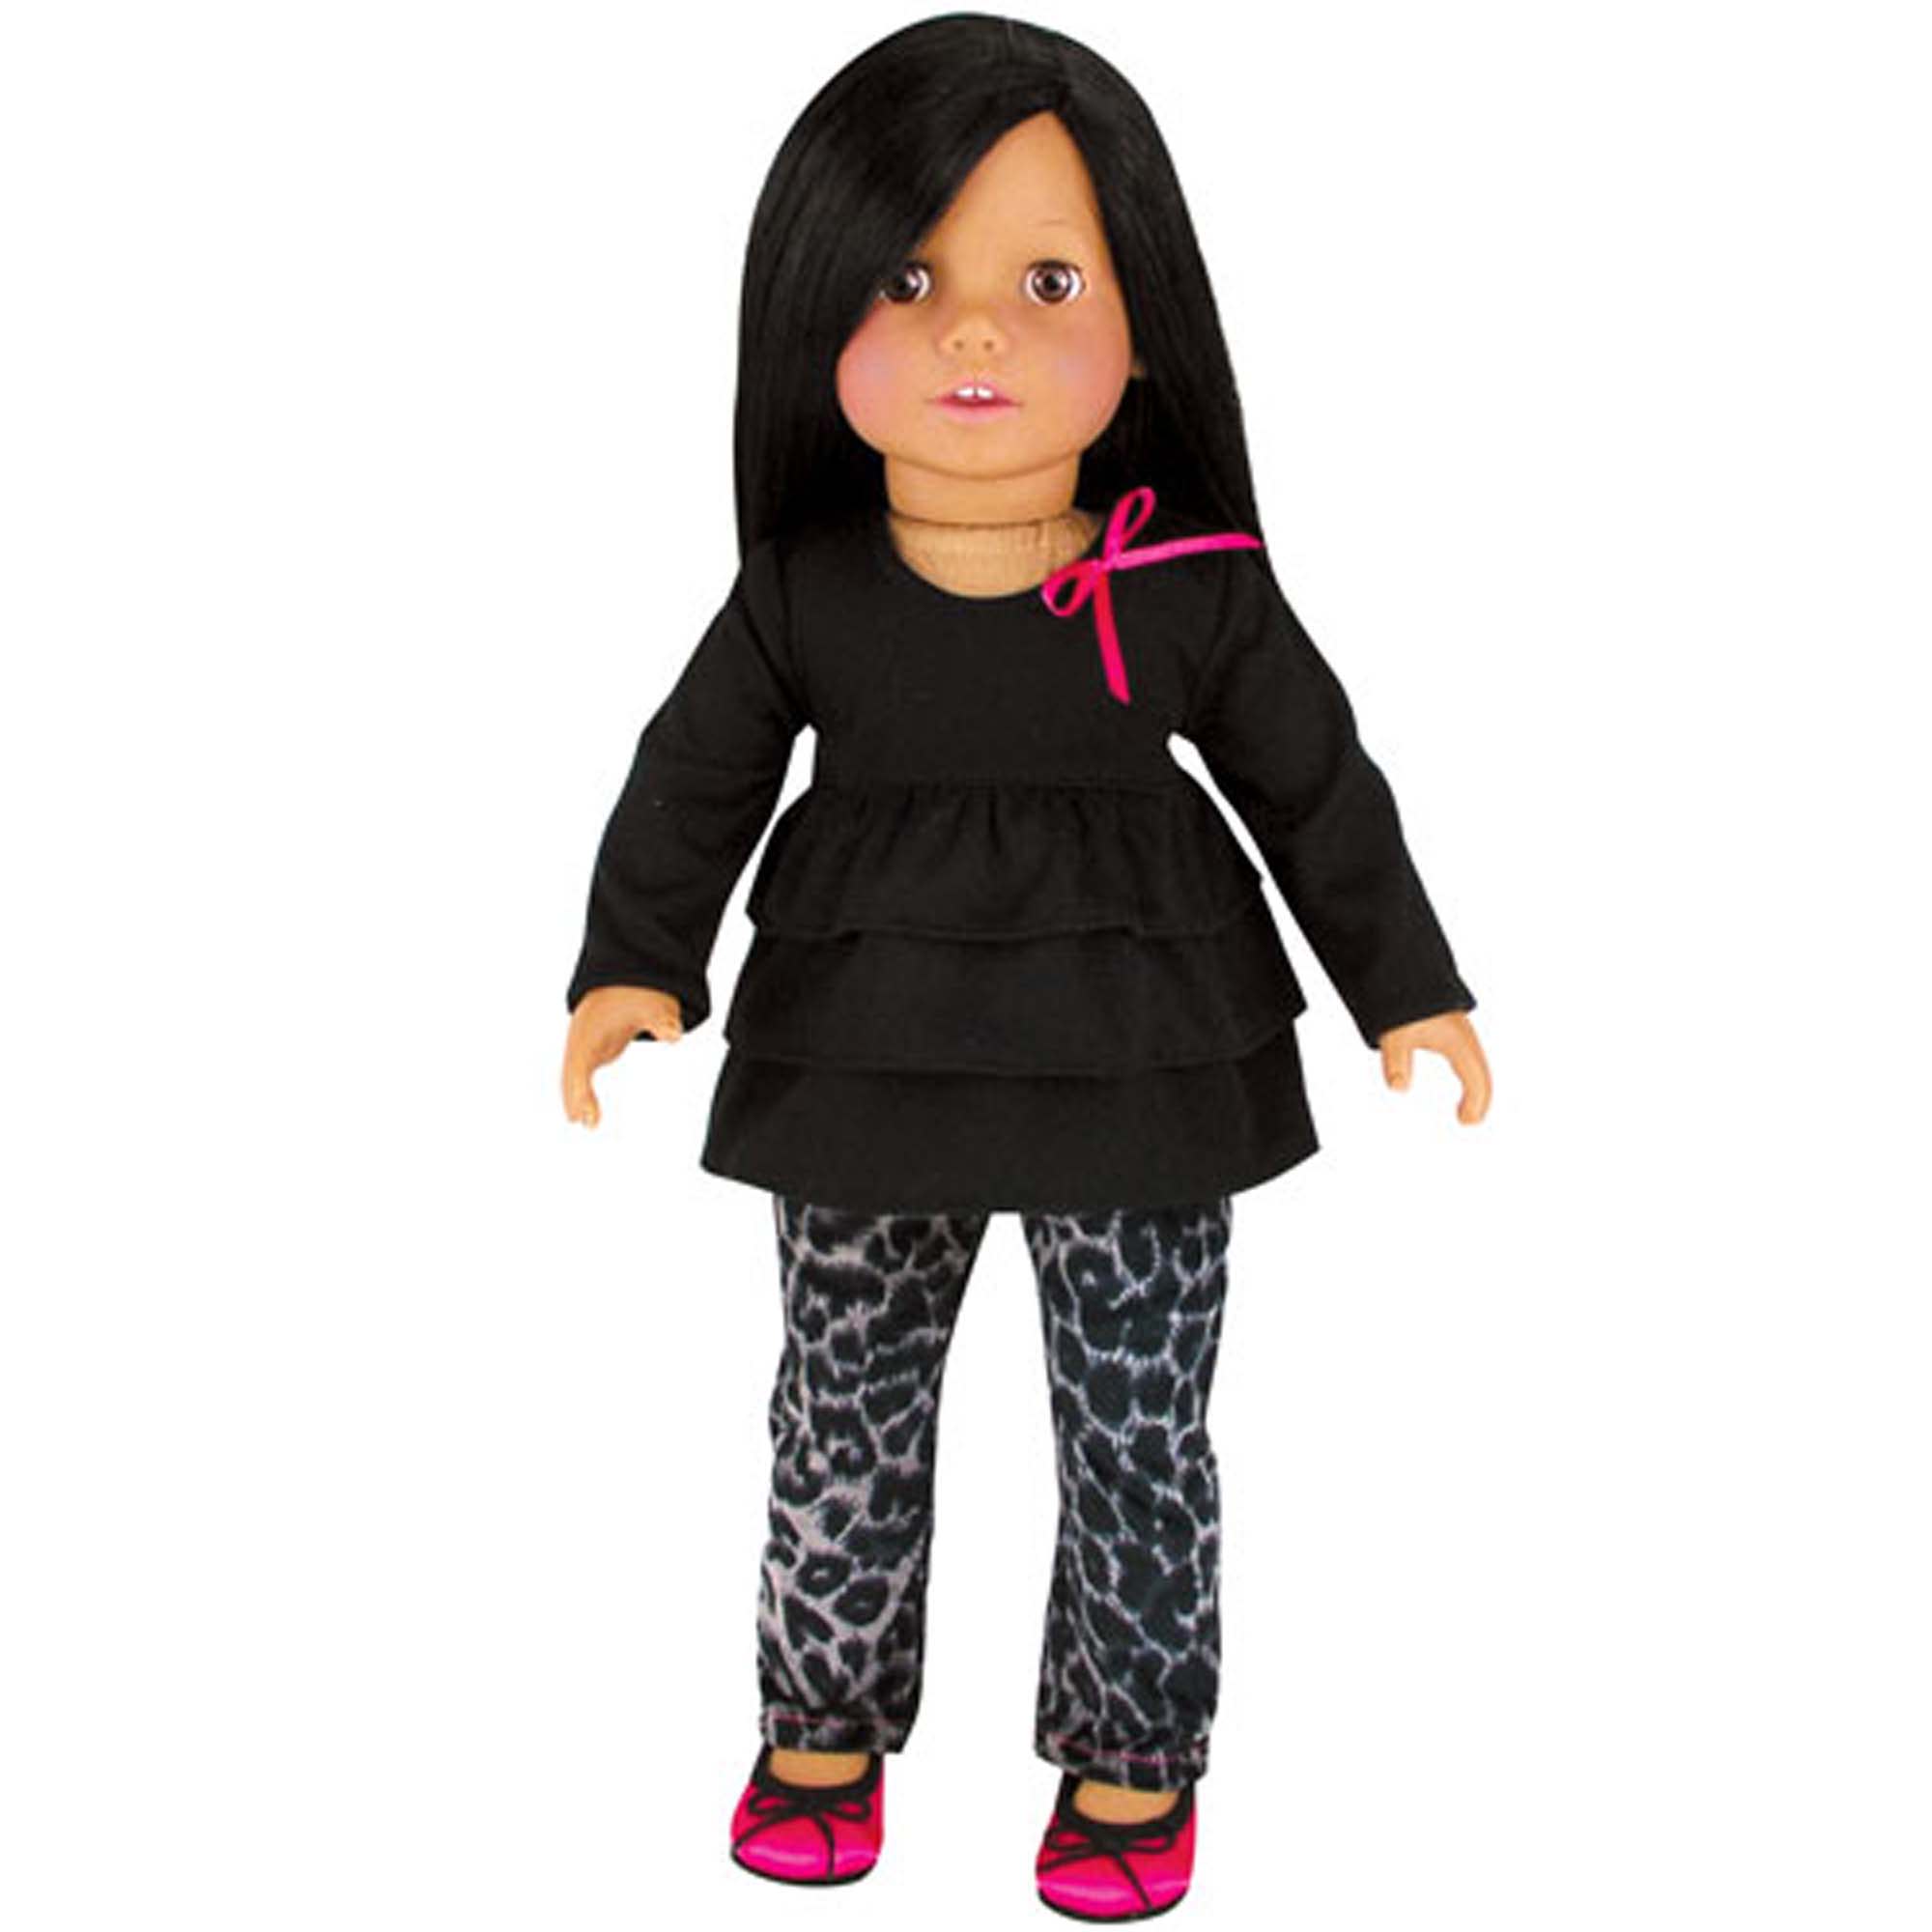 Sophia’s Two-Piece Complete Doll Outfit Set with Leopard Animal Print Jeans & Long Sleeve Ruffle Peplum-Style Tee Shirt for 18” Dolls, Black